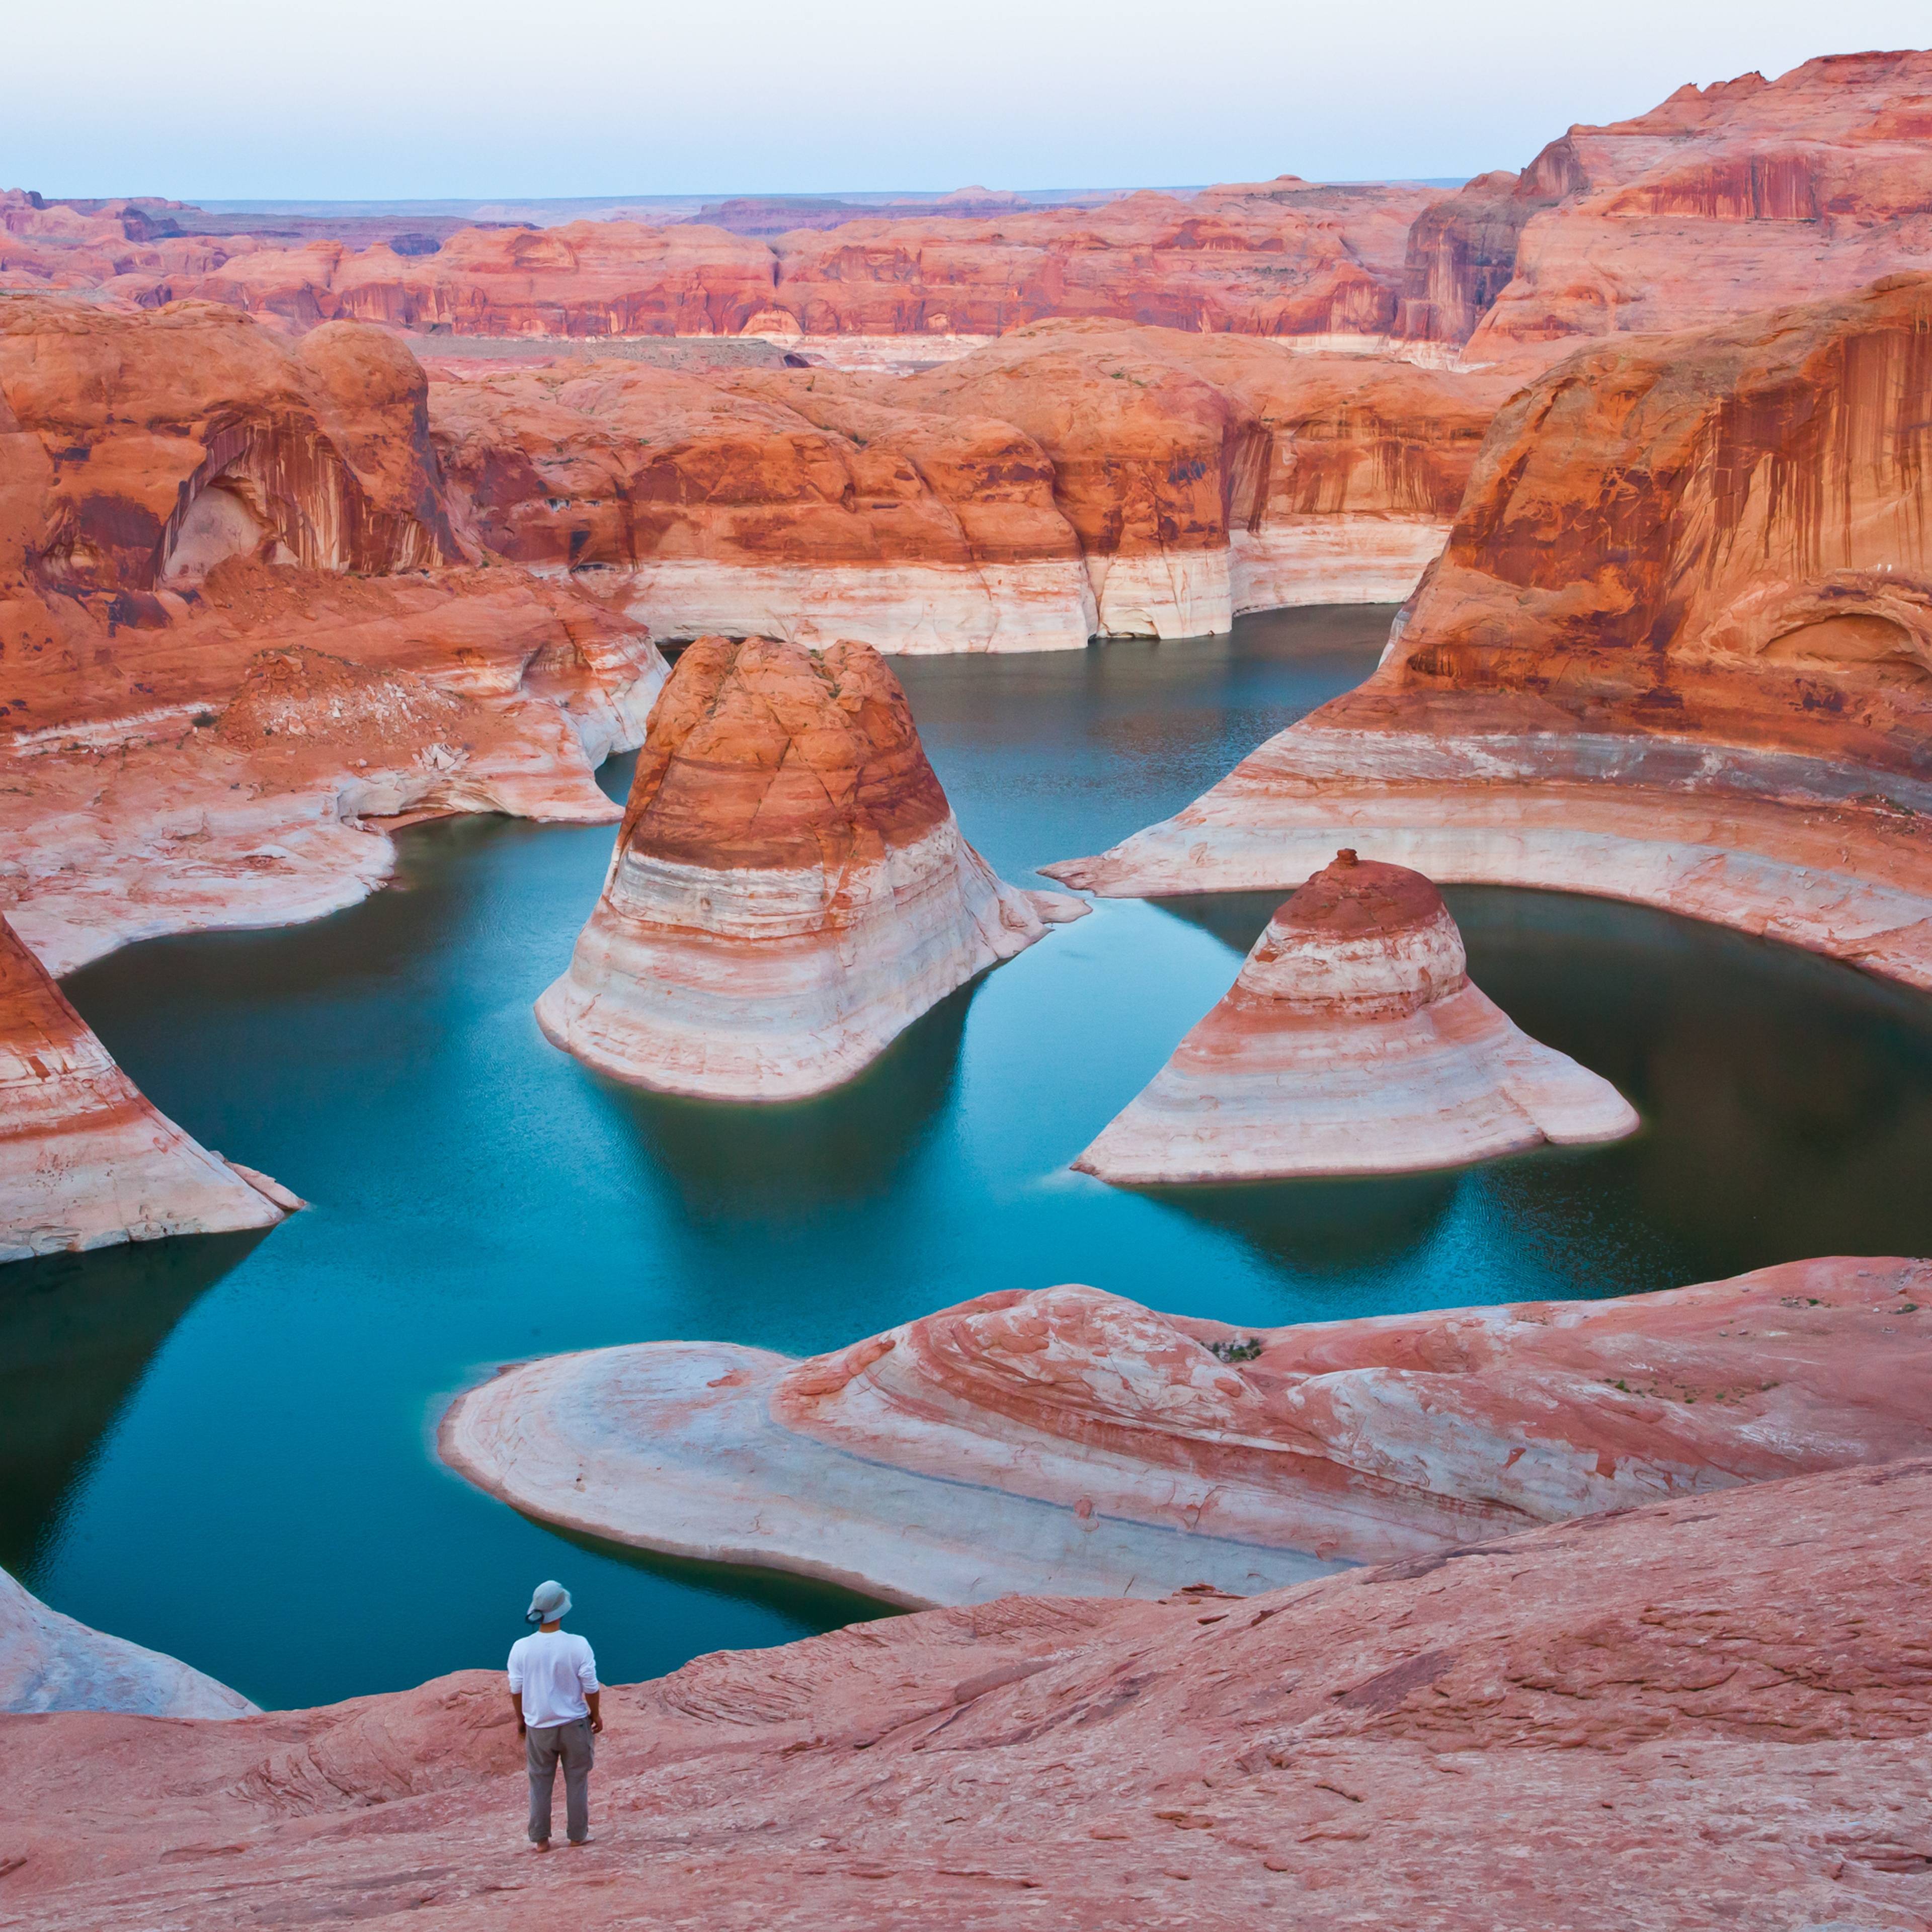 Travel Through Arizona, Utah and Nevada and see the Natural Wonders of the Southwest